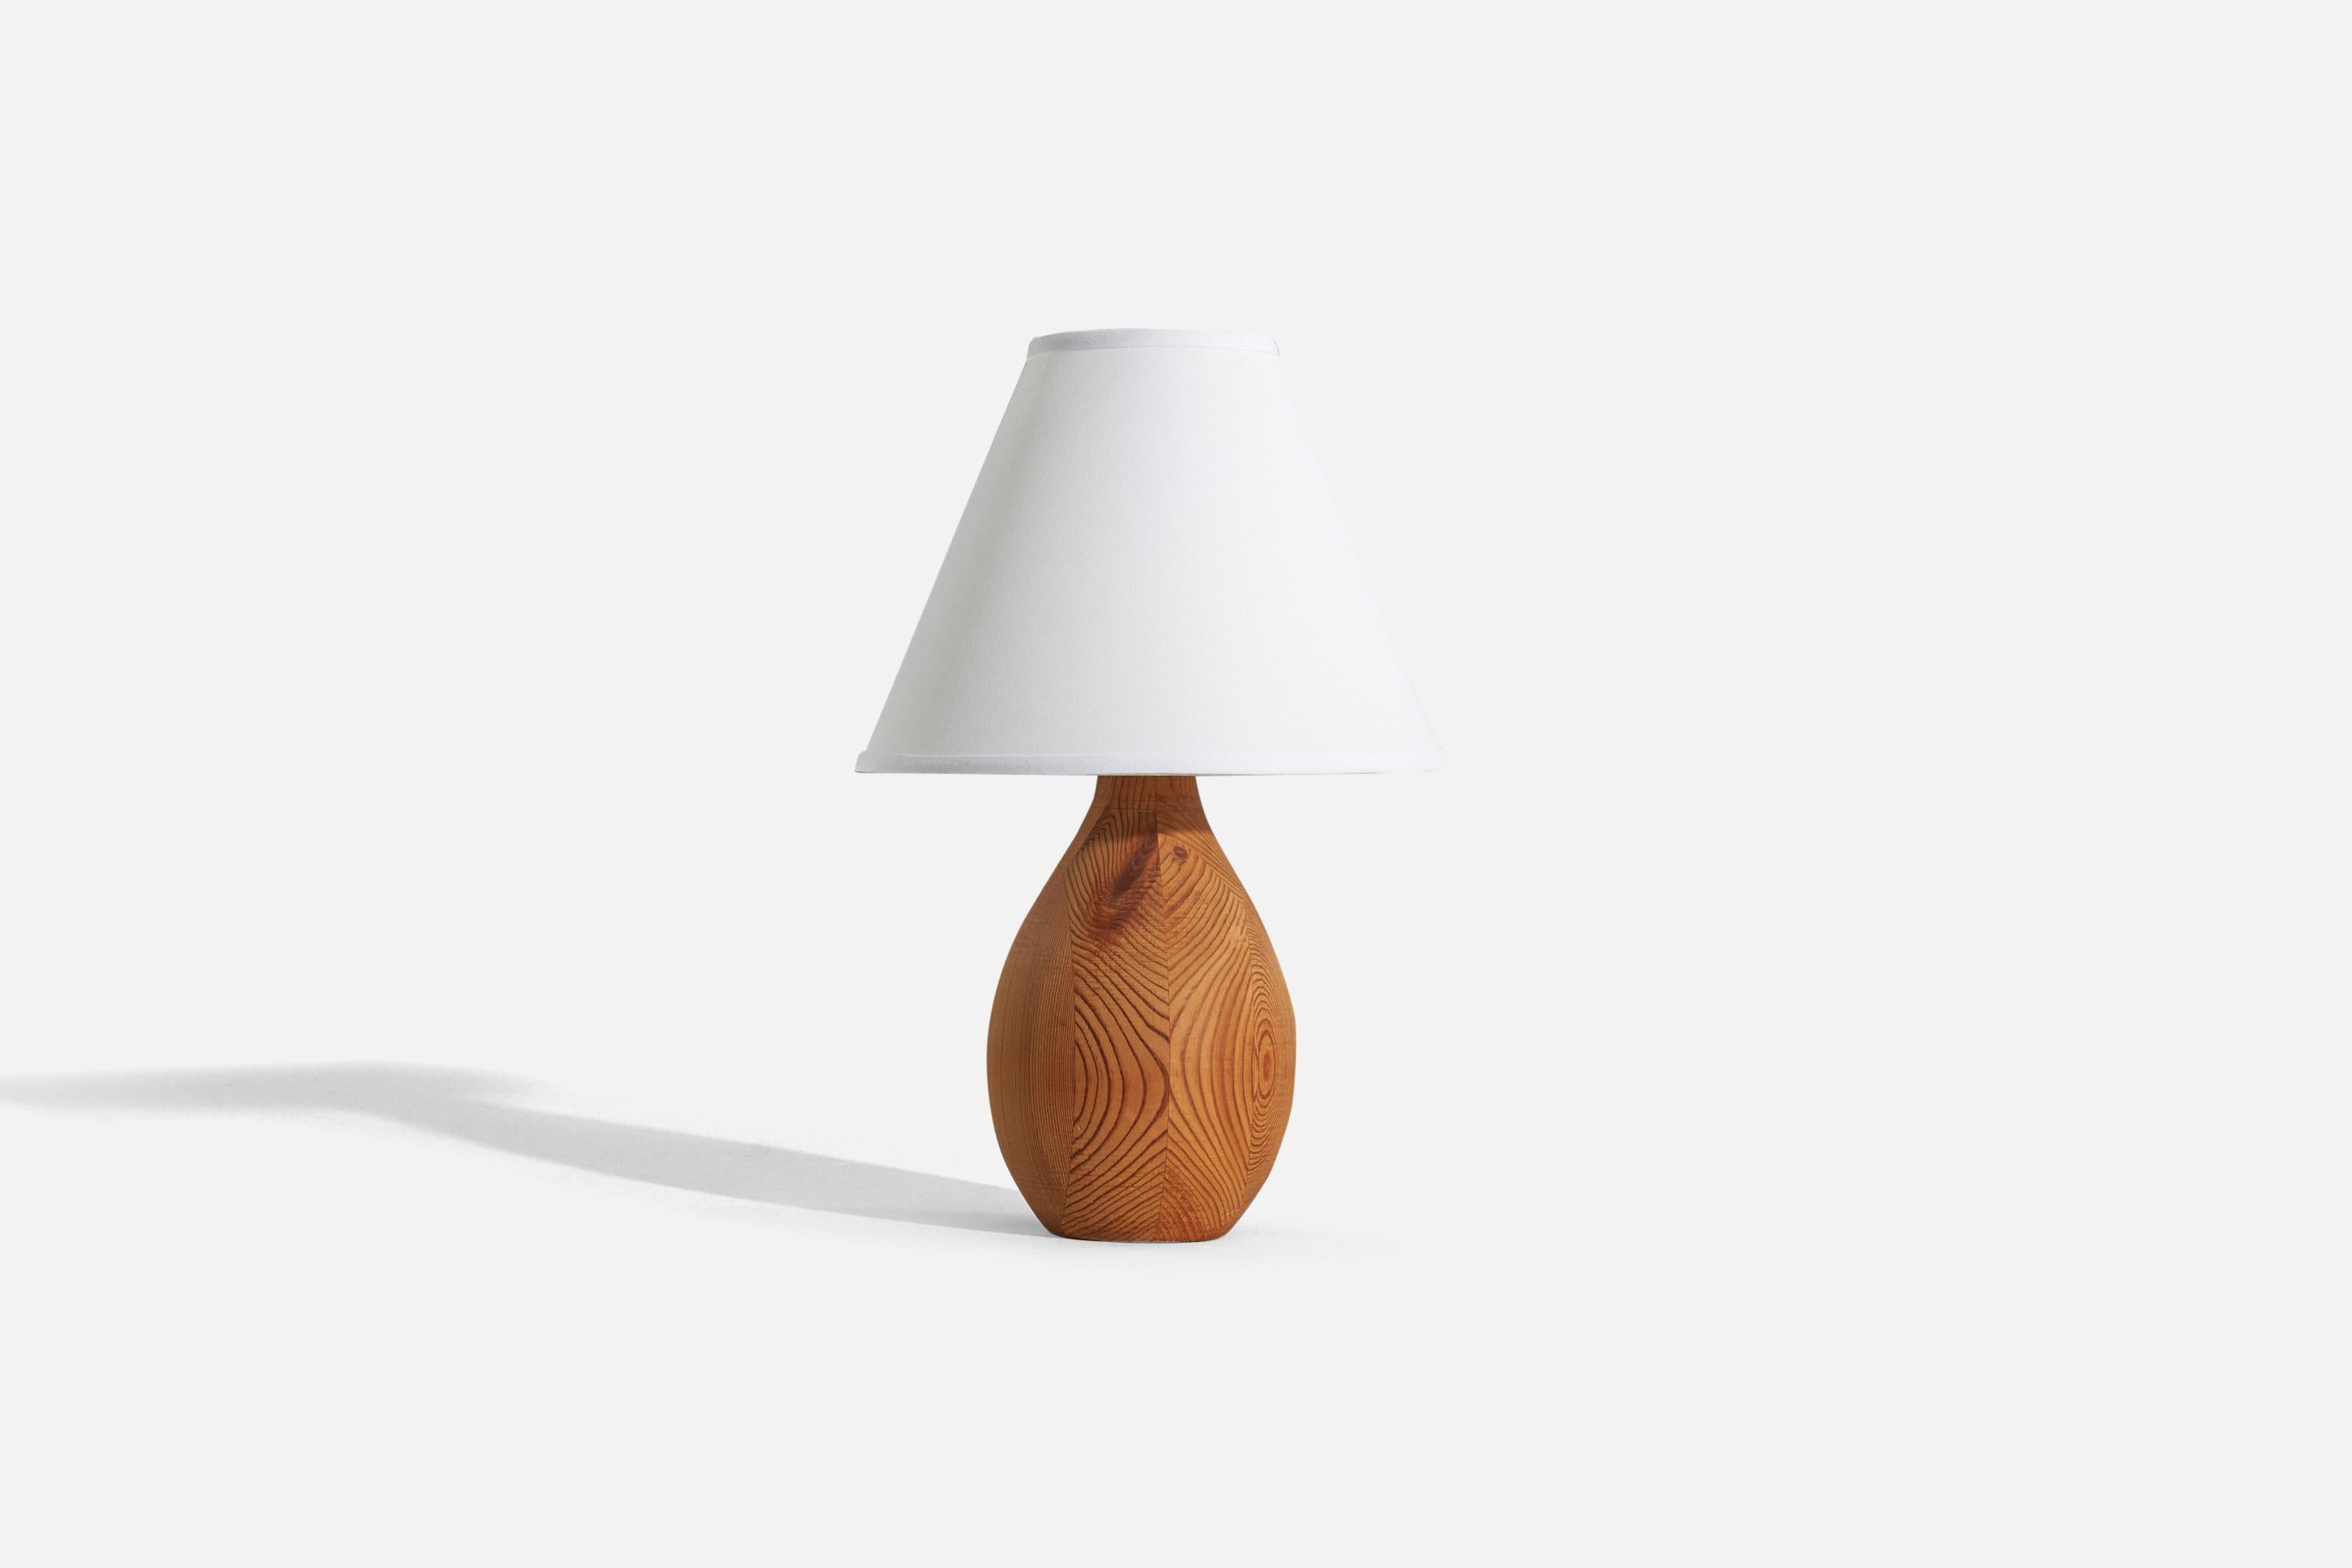 A solid pine table lamp designed and produced by a Swedish designer, Sweden, 1970s.

Sold without lampshade. 
Dimensions of Lamp (inches) : 11.0625 x 5.375 x 5.375 (H x W x D)
Dimensions of Shade (inches) : 4 x 10 x 8 (T x B x H)
Dimension of